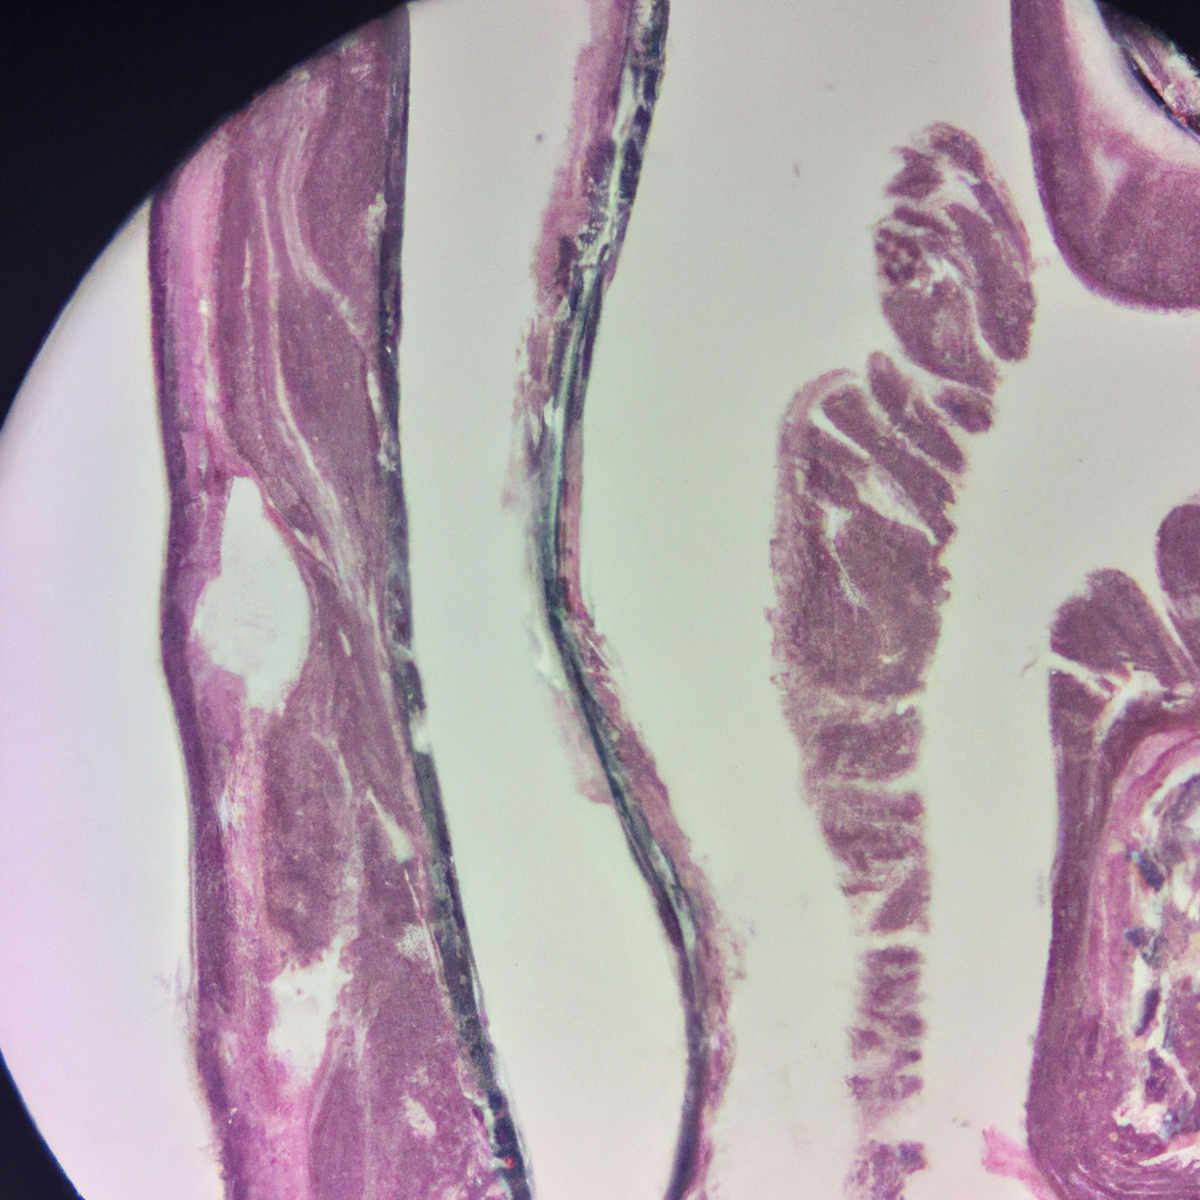 Paraneoplastic Pemphigus skin biopsy slide with characteristic features.